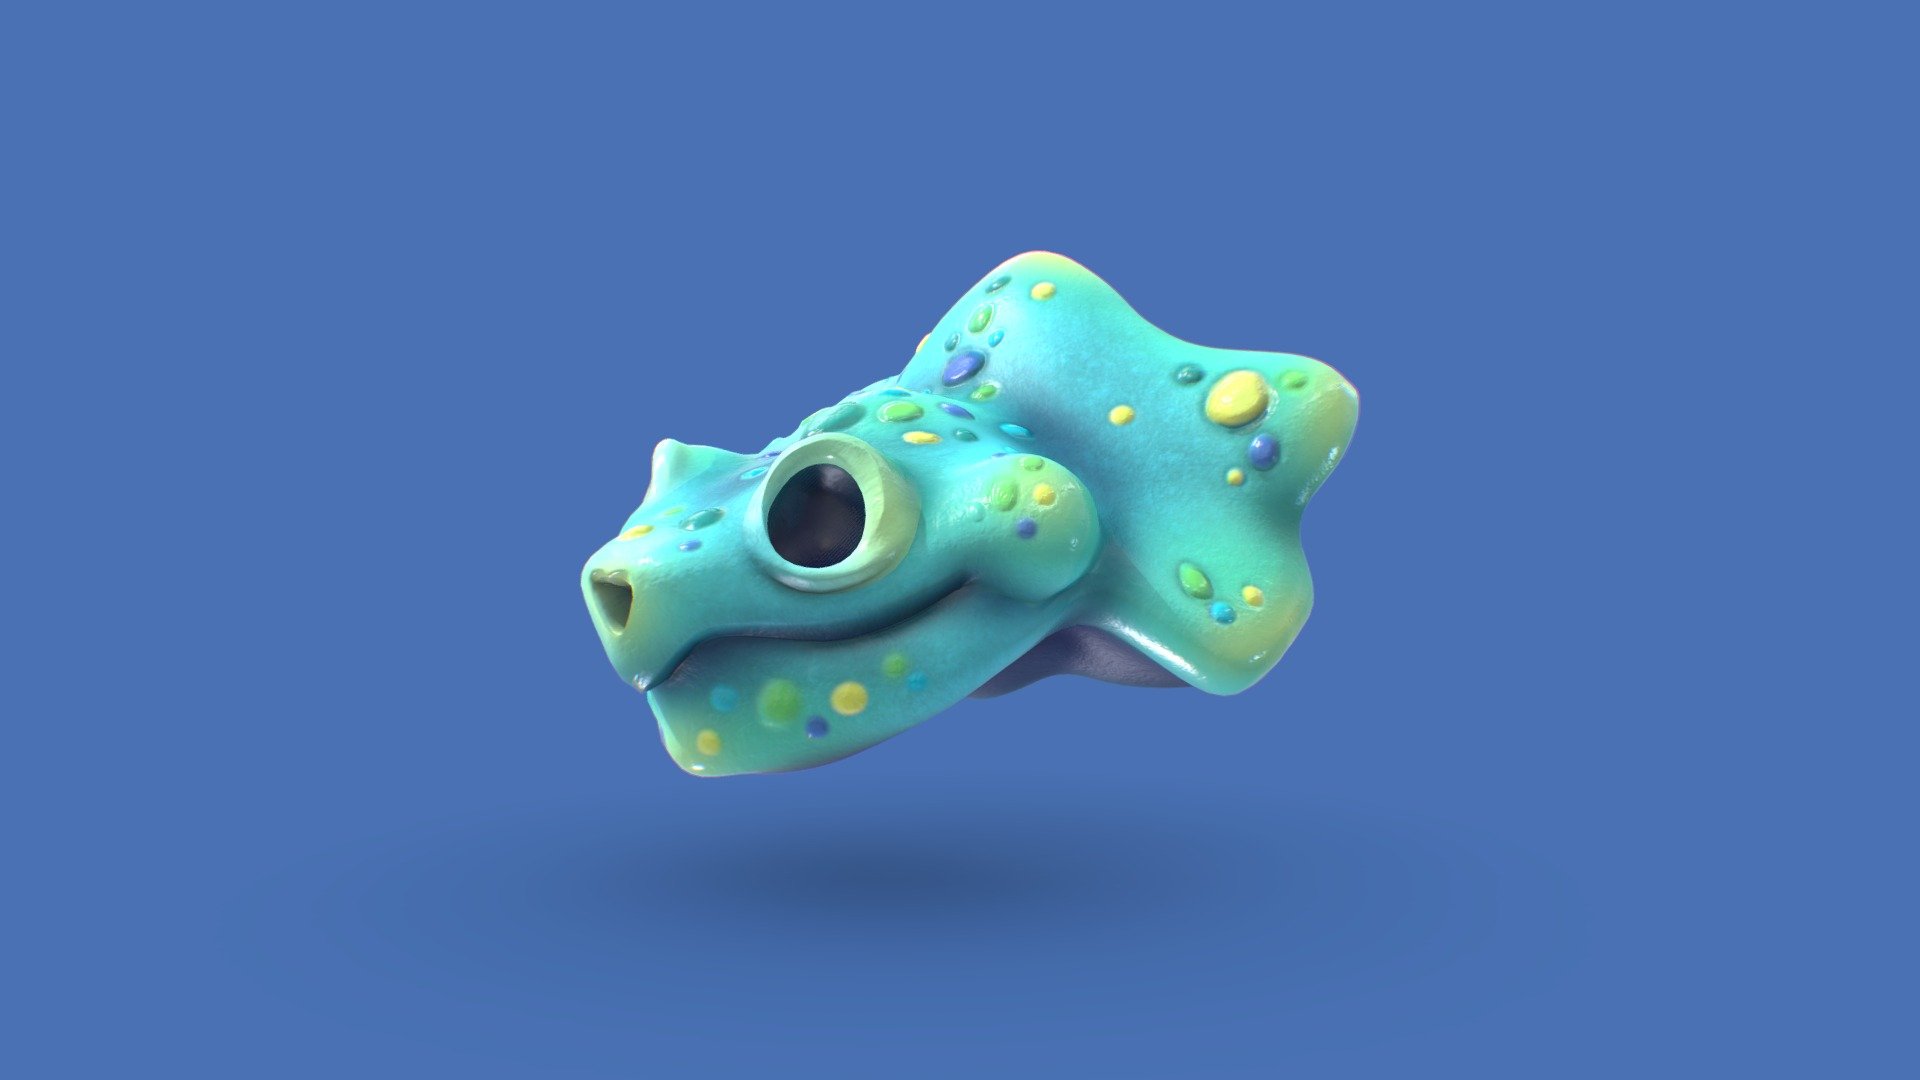 B2B2_Porchet_Fabiola_CharaInt3D_SKull

First exercise in organic modelization with Zbrush and texturing with Substance Painter, 2020 3d model